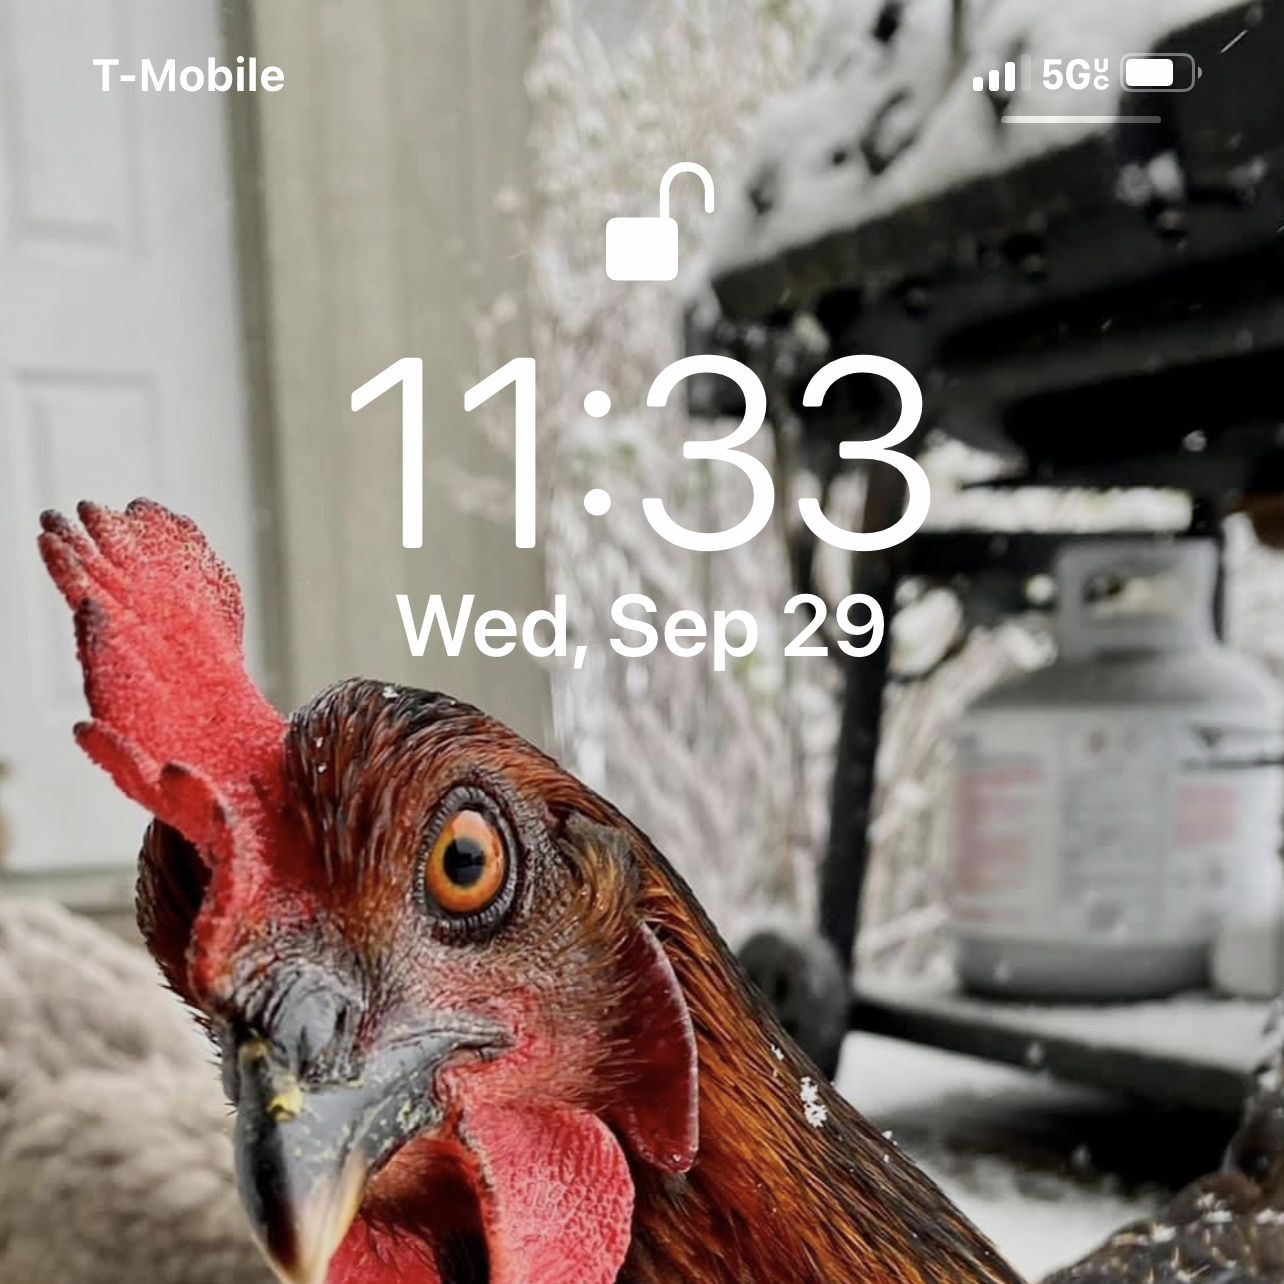 My phone lock screen as a chicken with 5GUC in the upper corner.